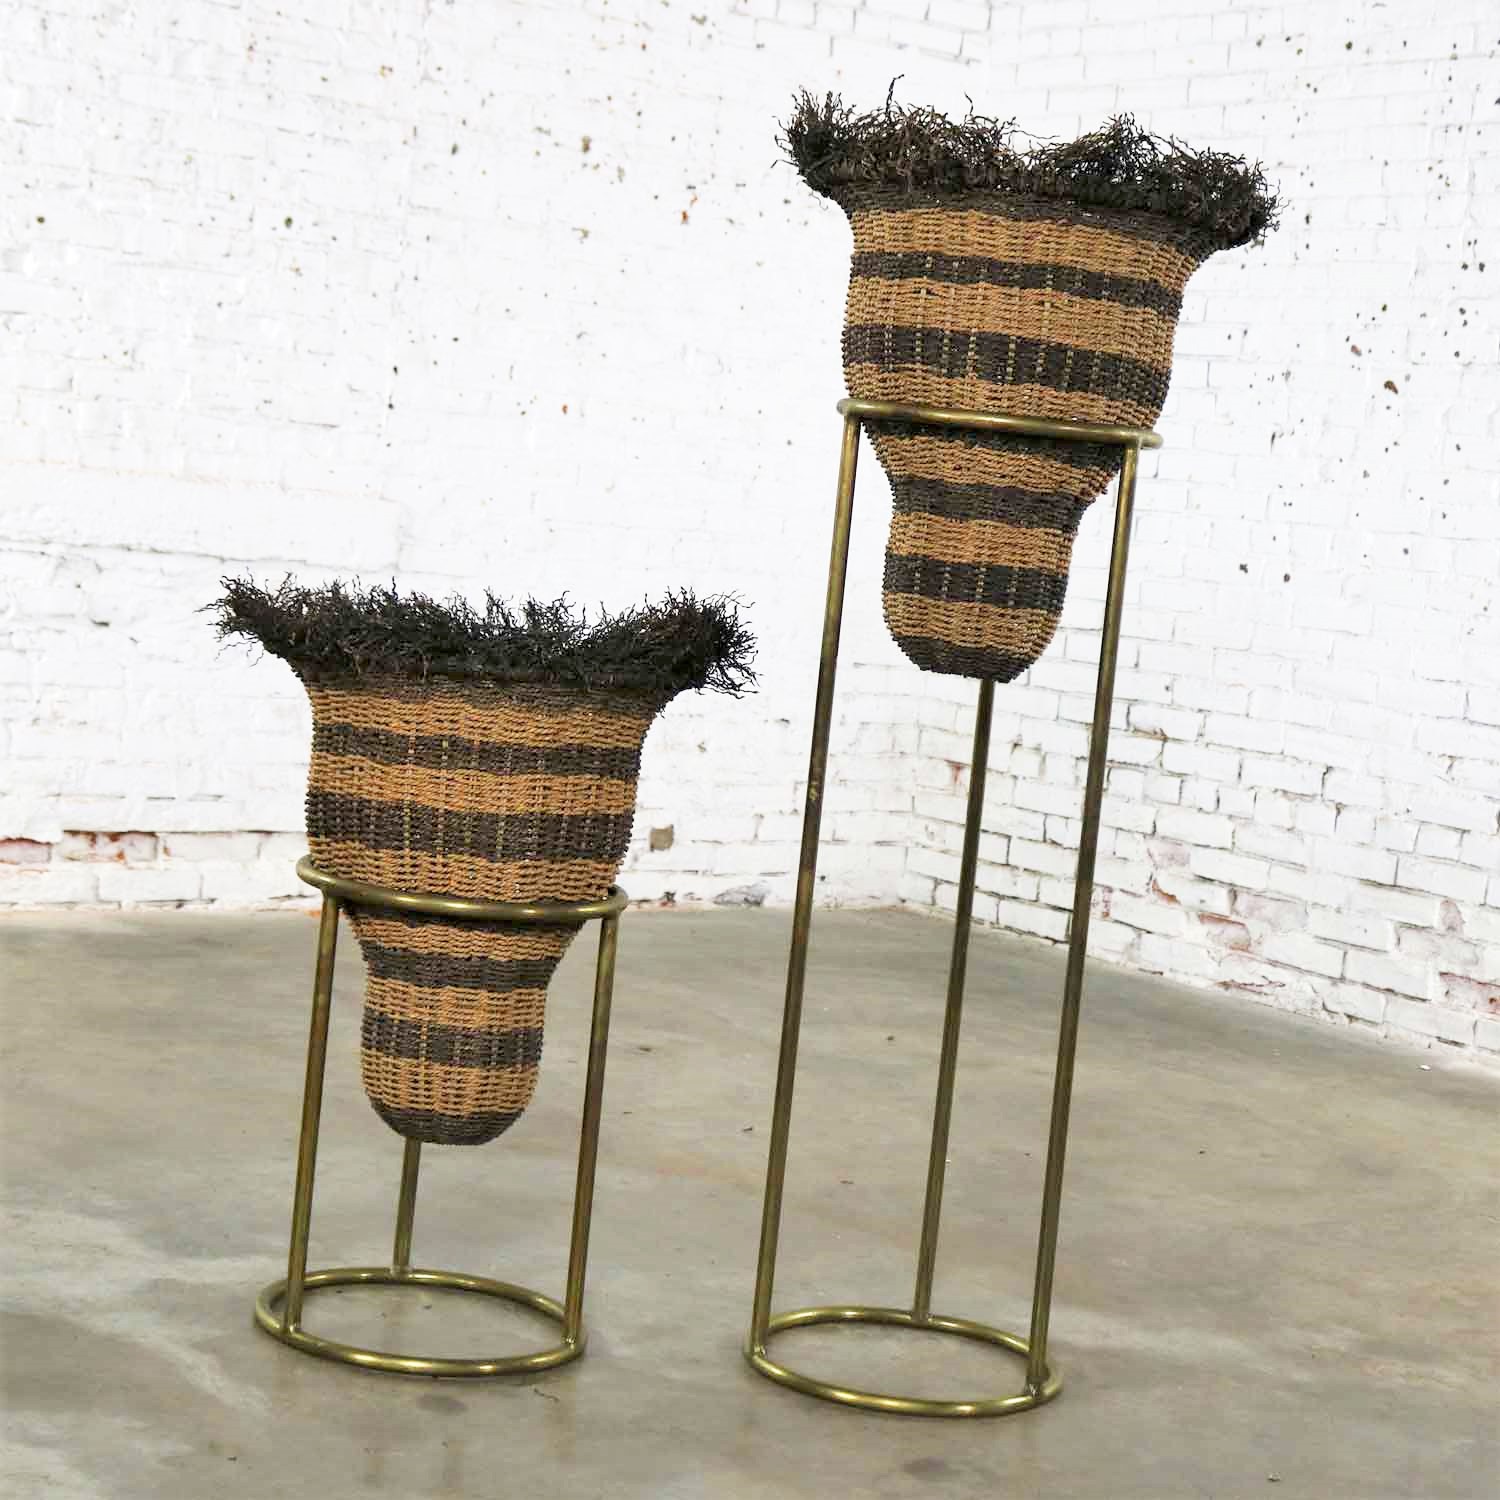 Round Brass Stands with Extra Large Basket Inserts for Plants or Flowers, Set of 3